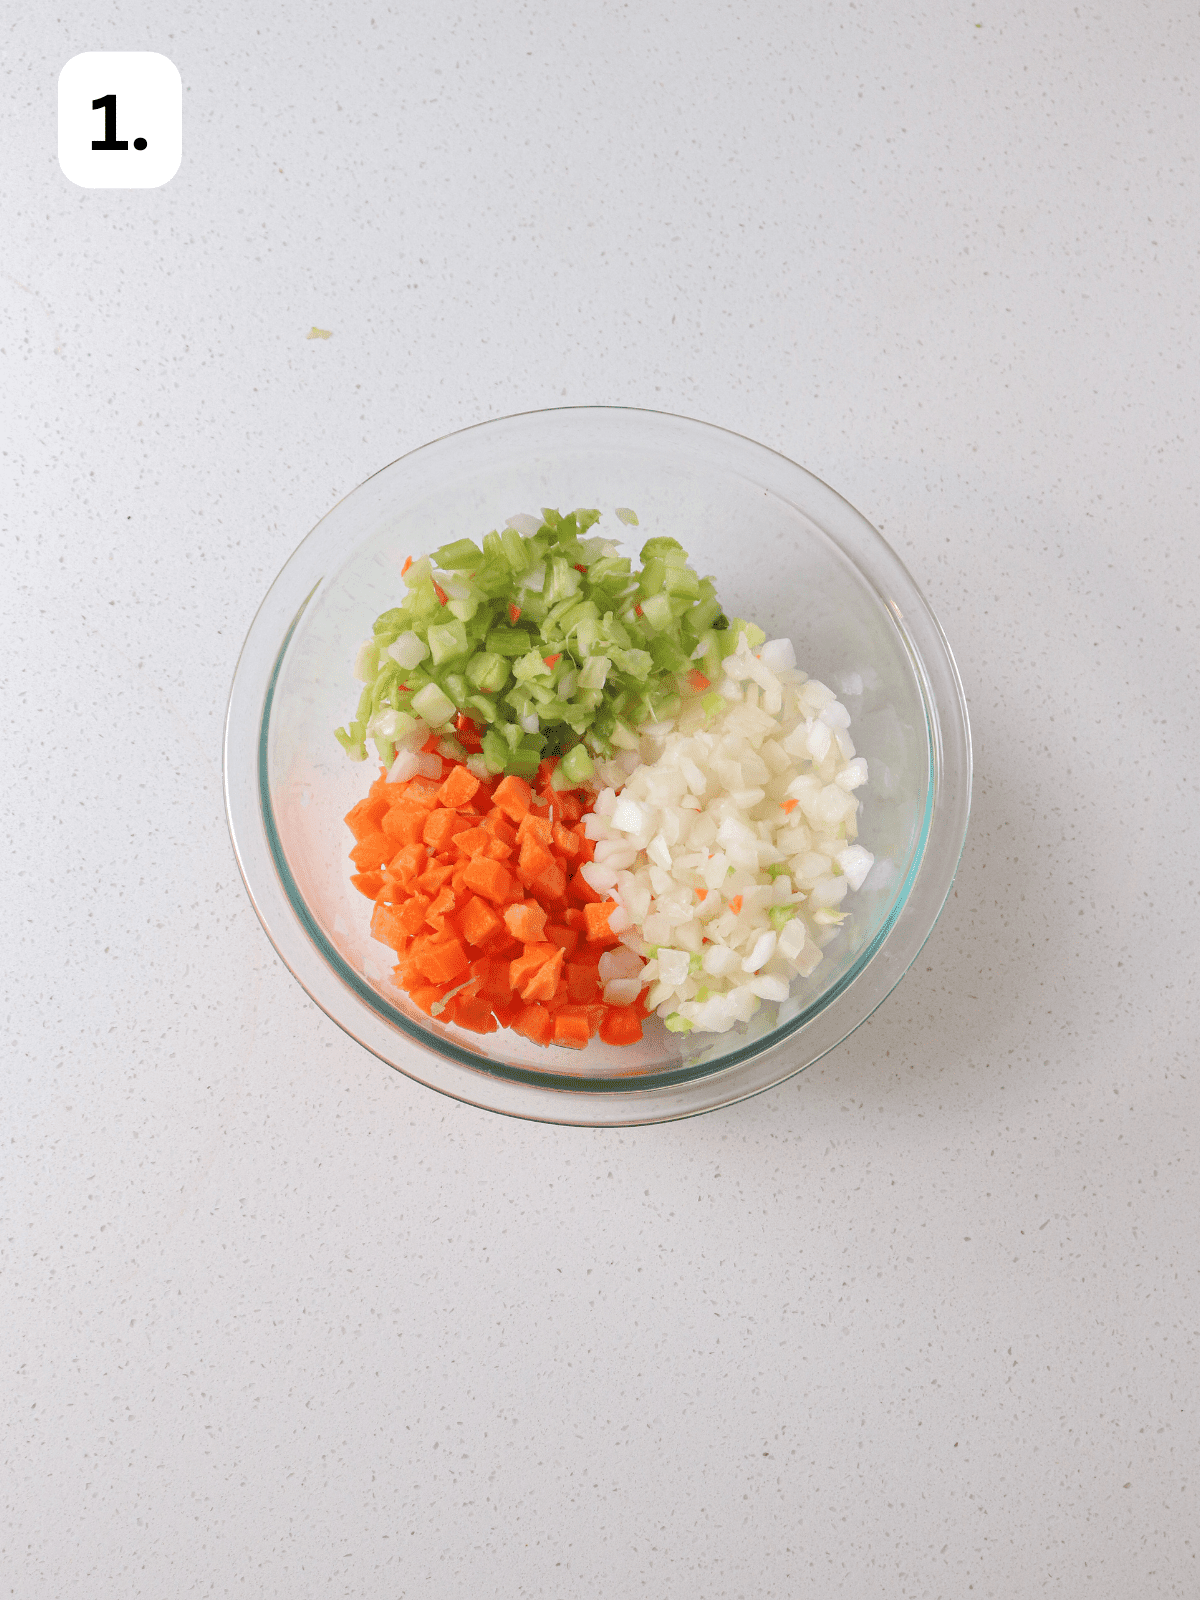 Finely diced carrots, celery and onion in bowl